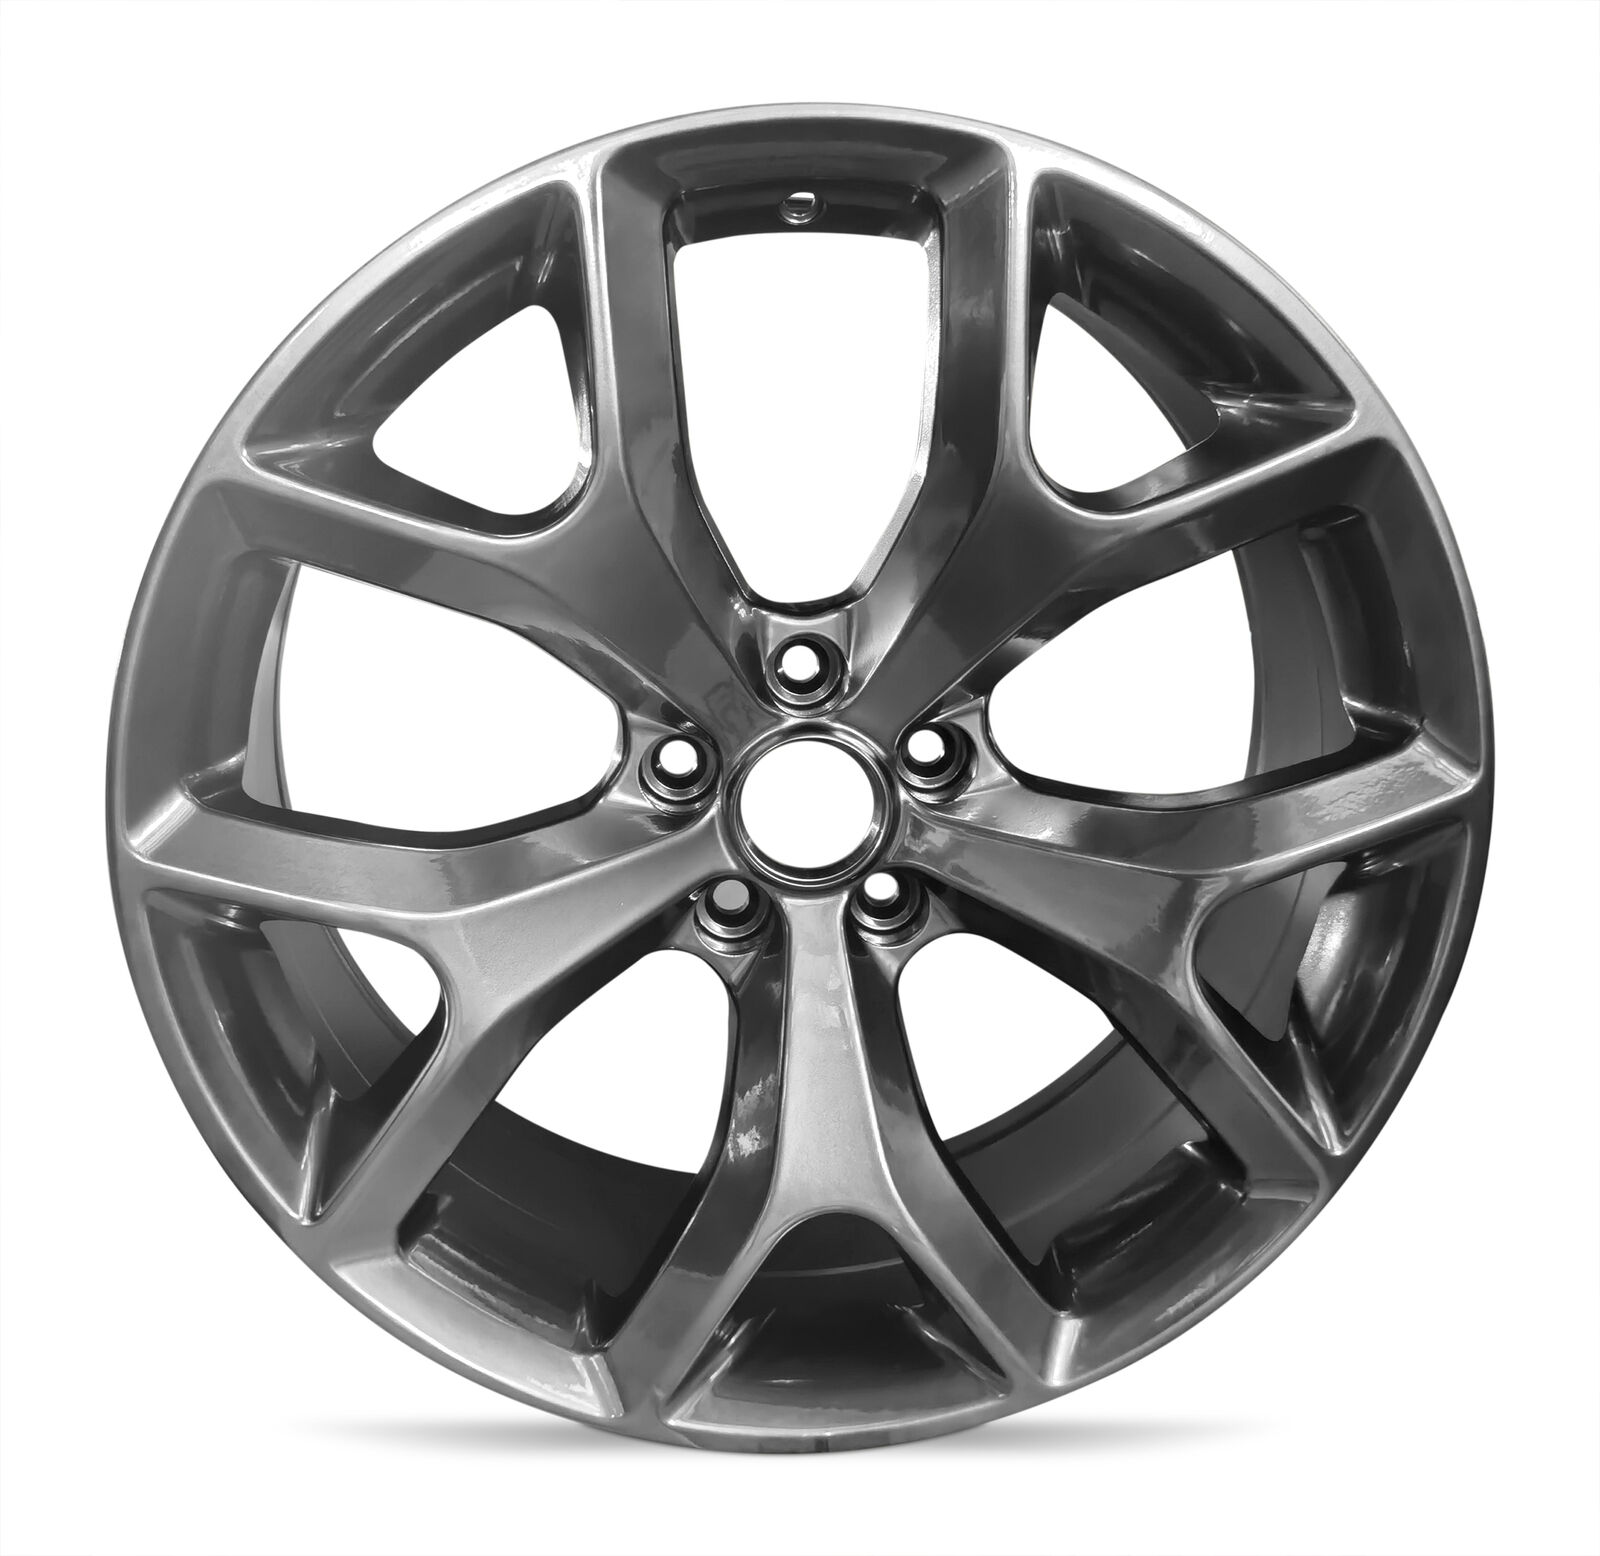 New Wheel For 2015-2017 Dodge Charger 20 Inch Hyper Silver Alloy Rim